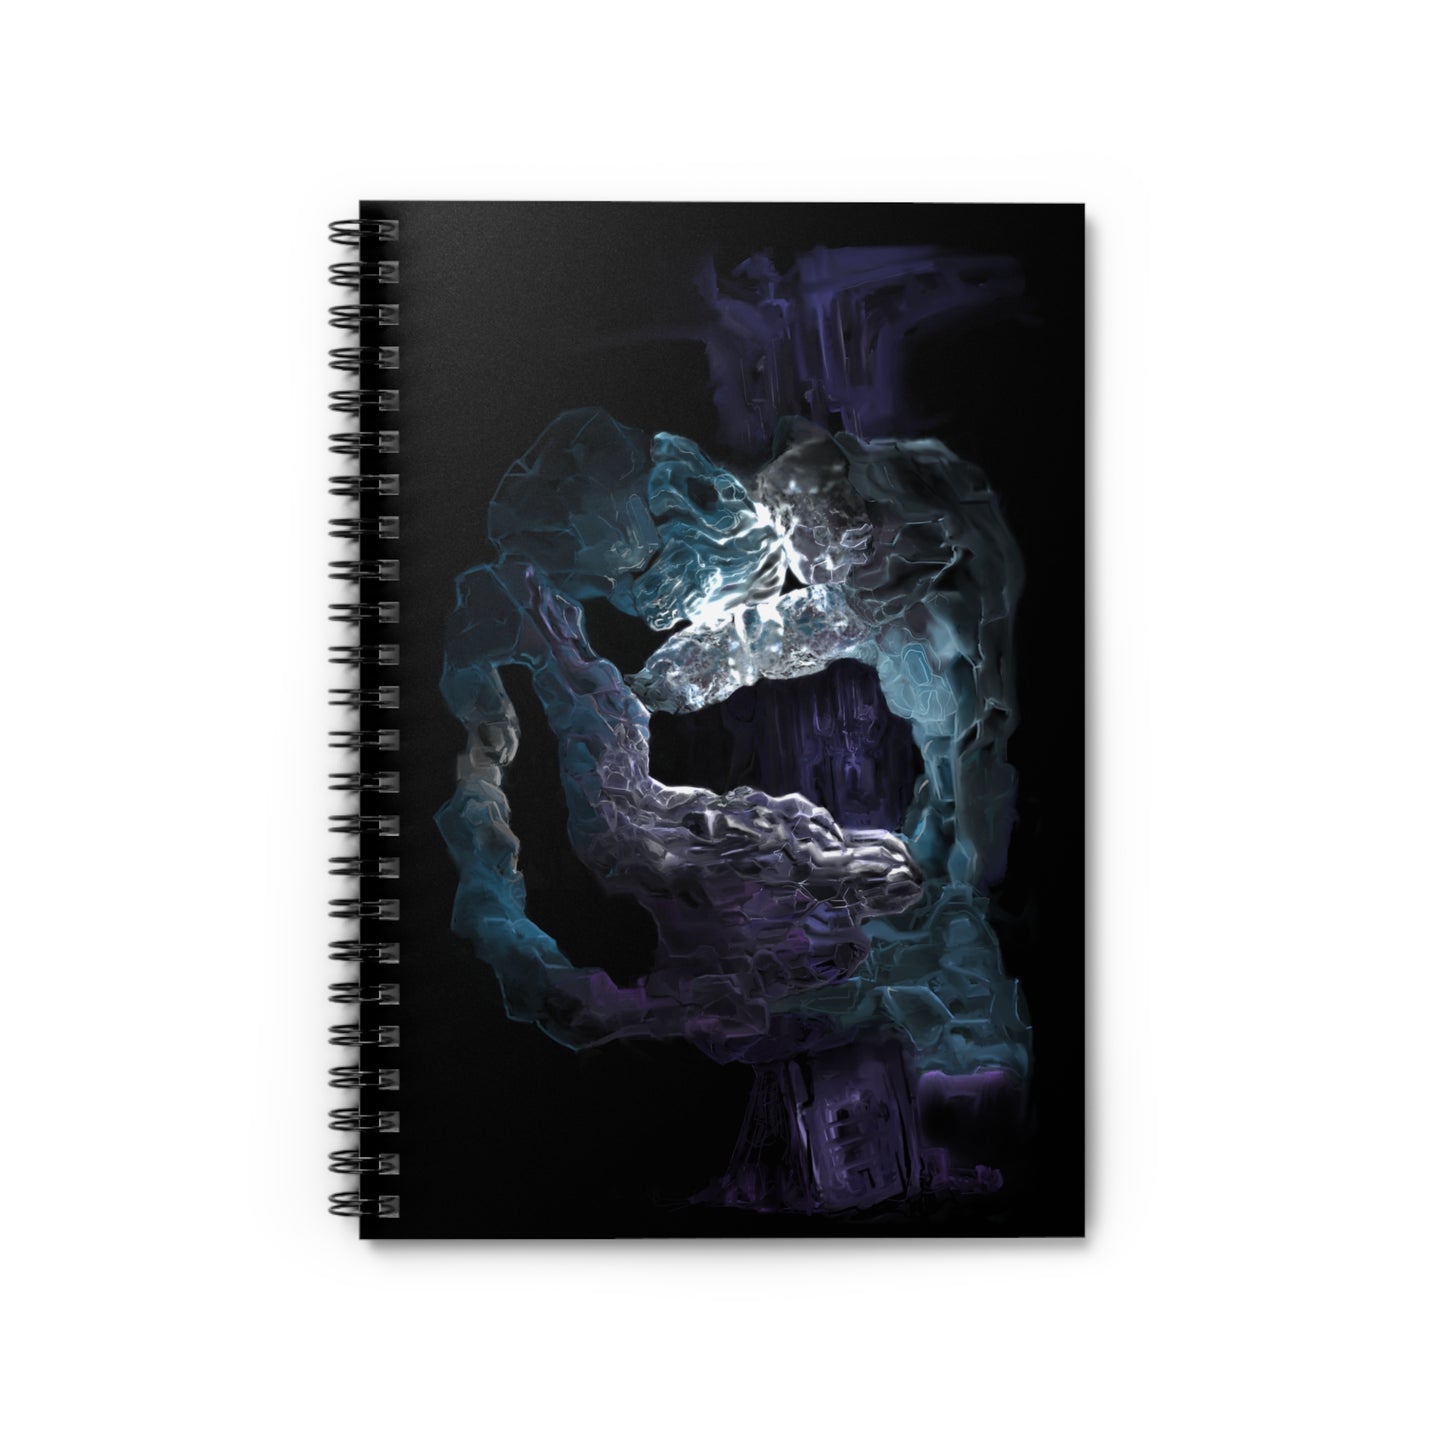 Anomalous Presence Spiral Notebook - Ruled Line